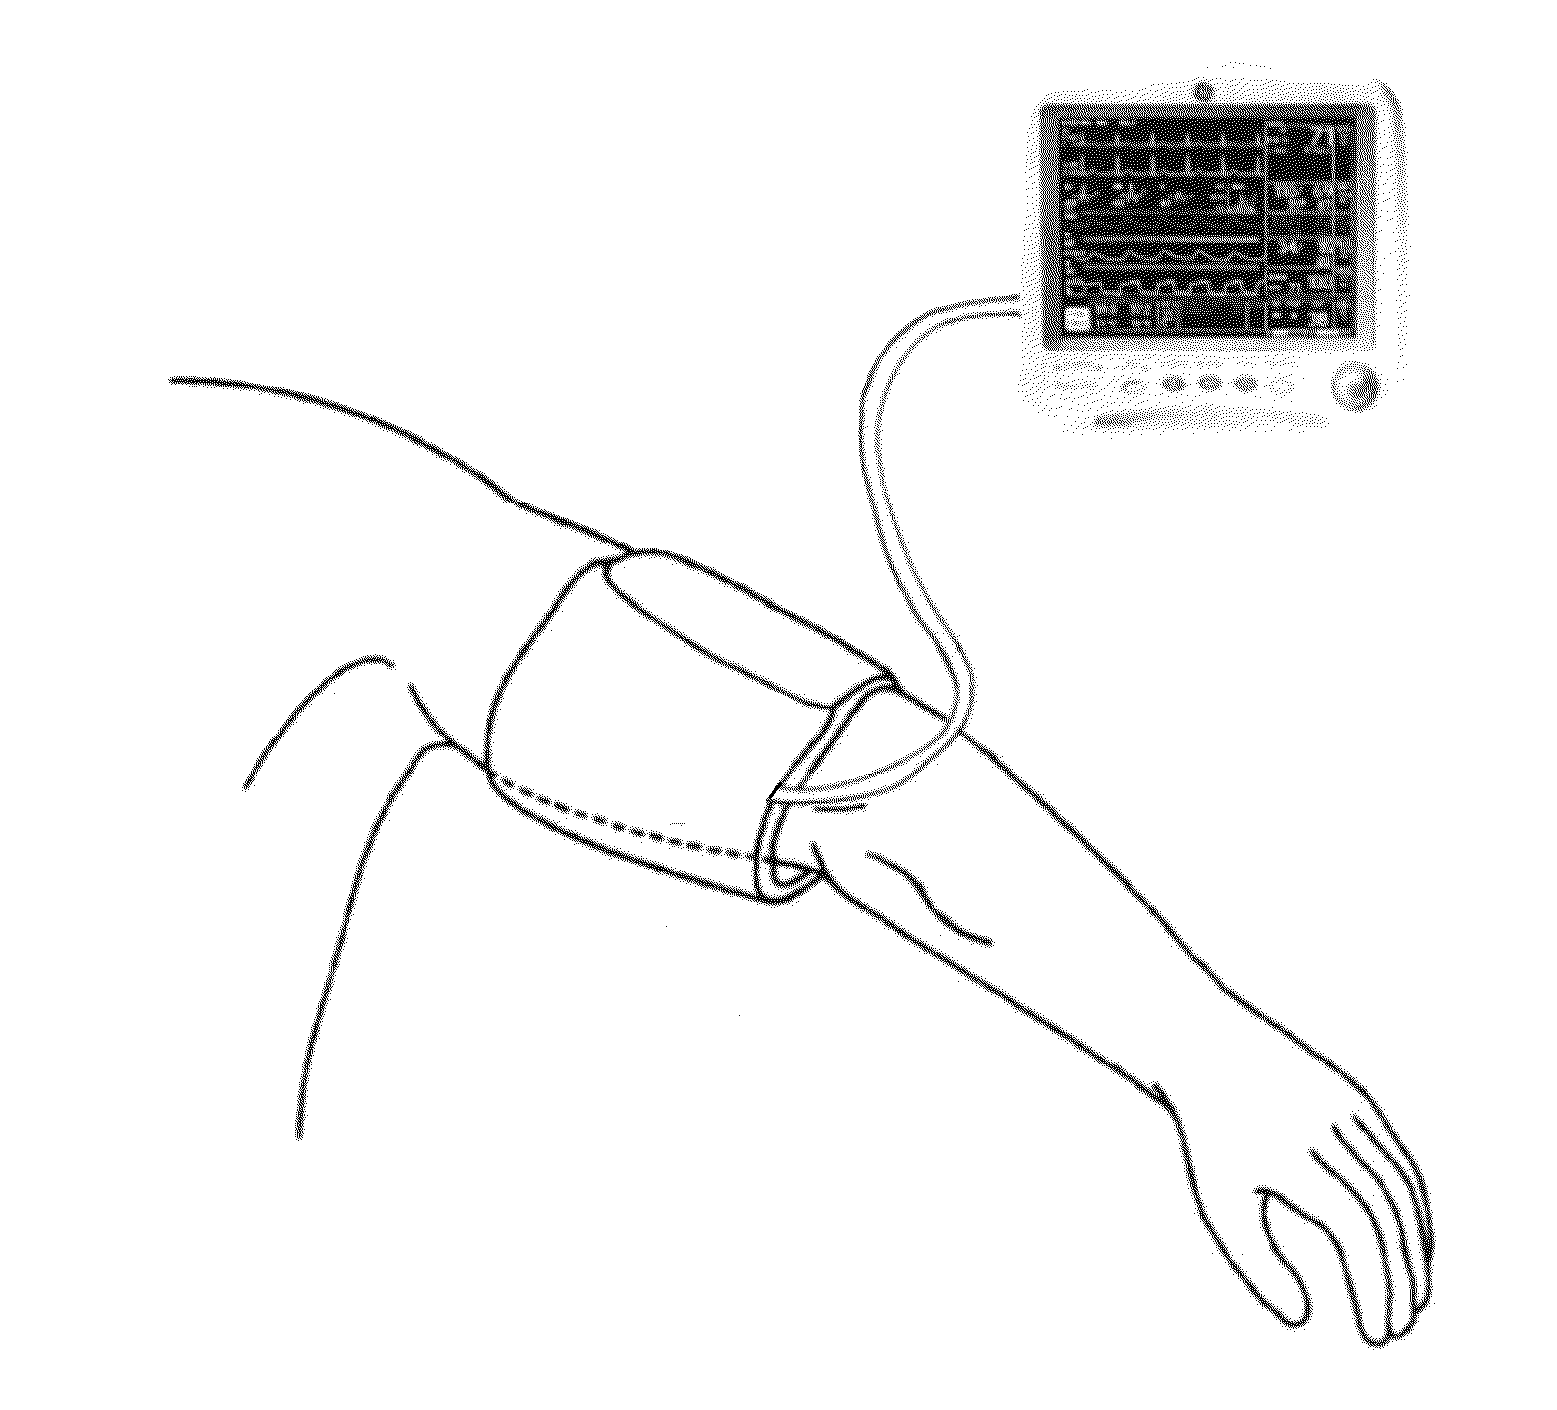 Multi-mode inflatable limb occlusion device